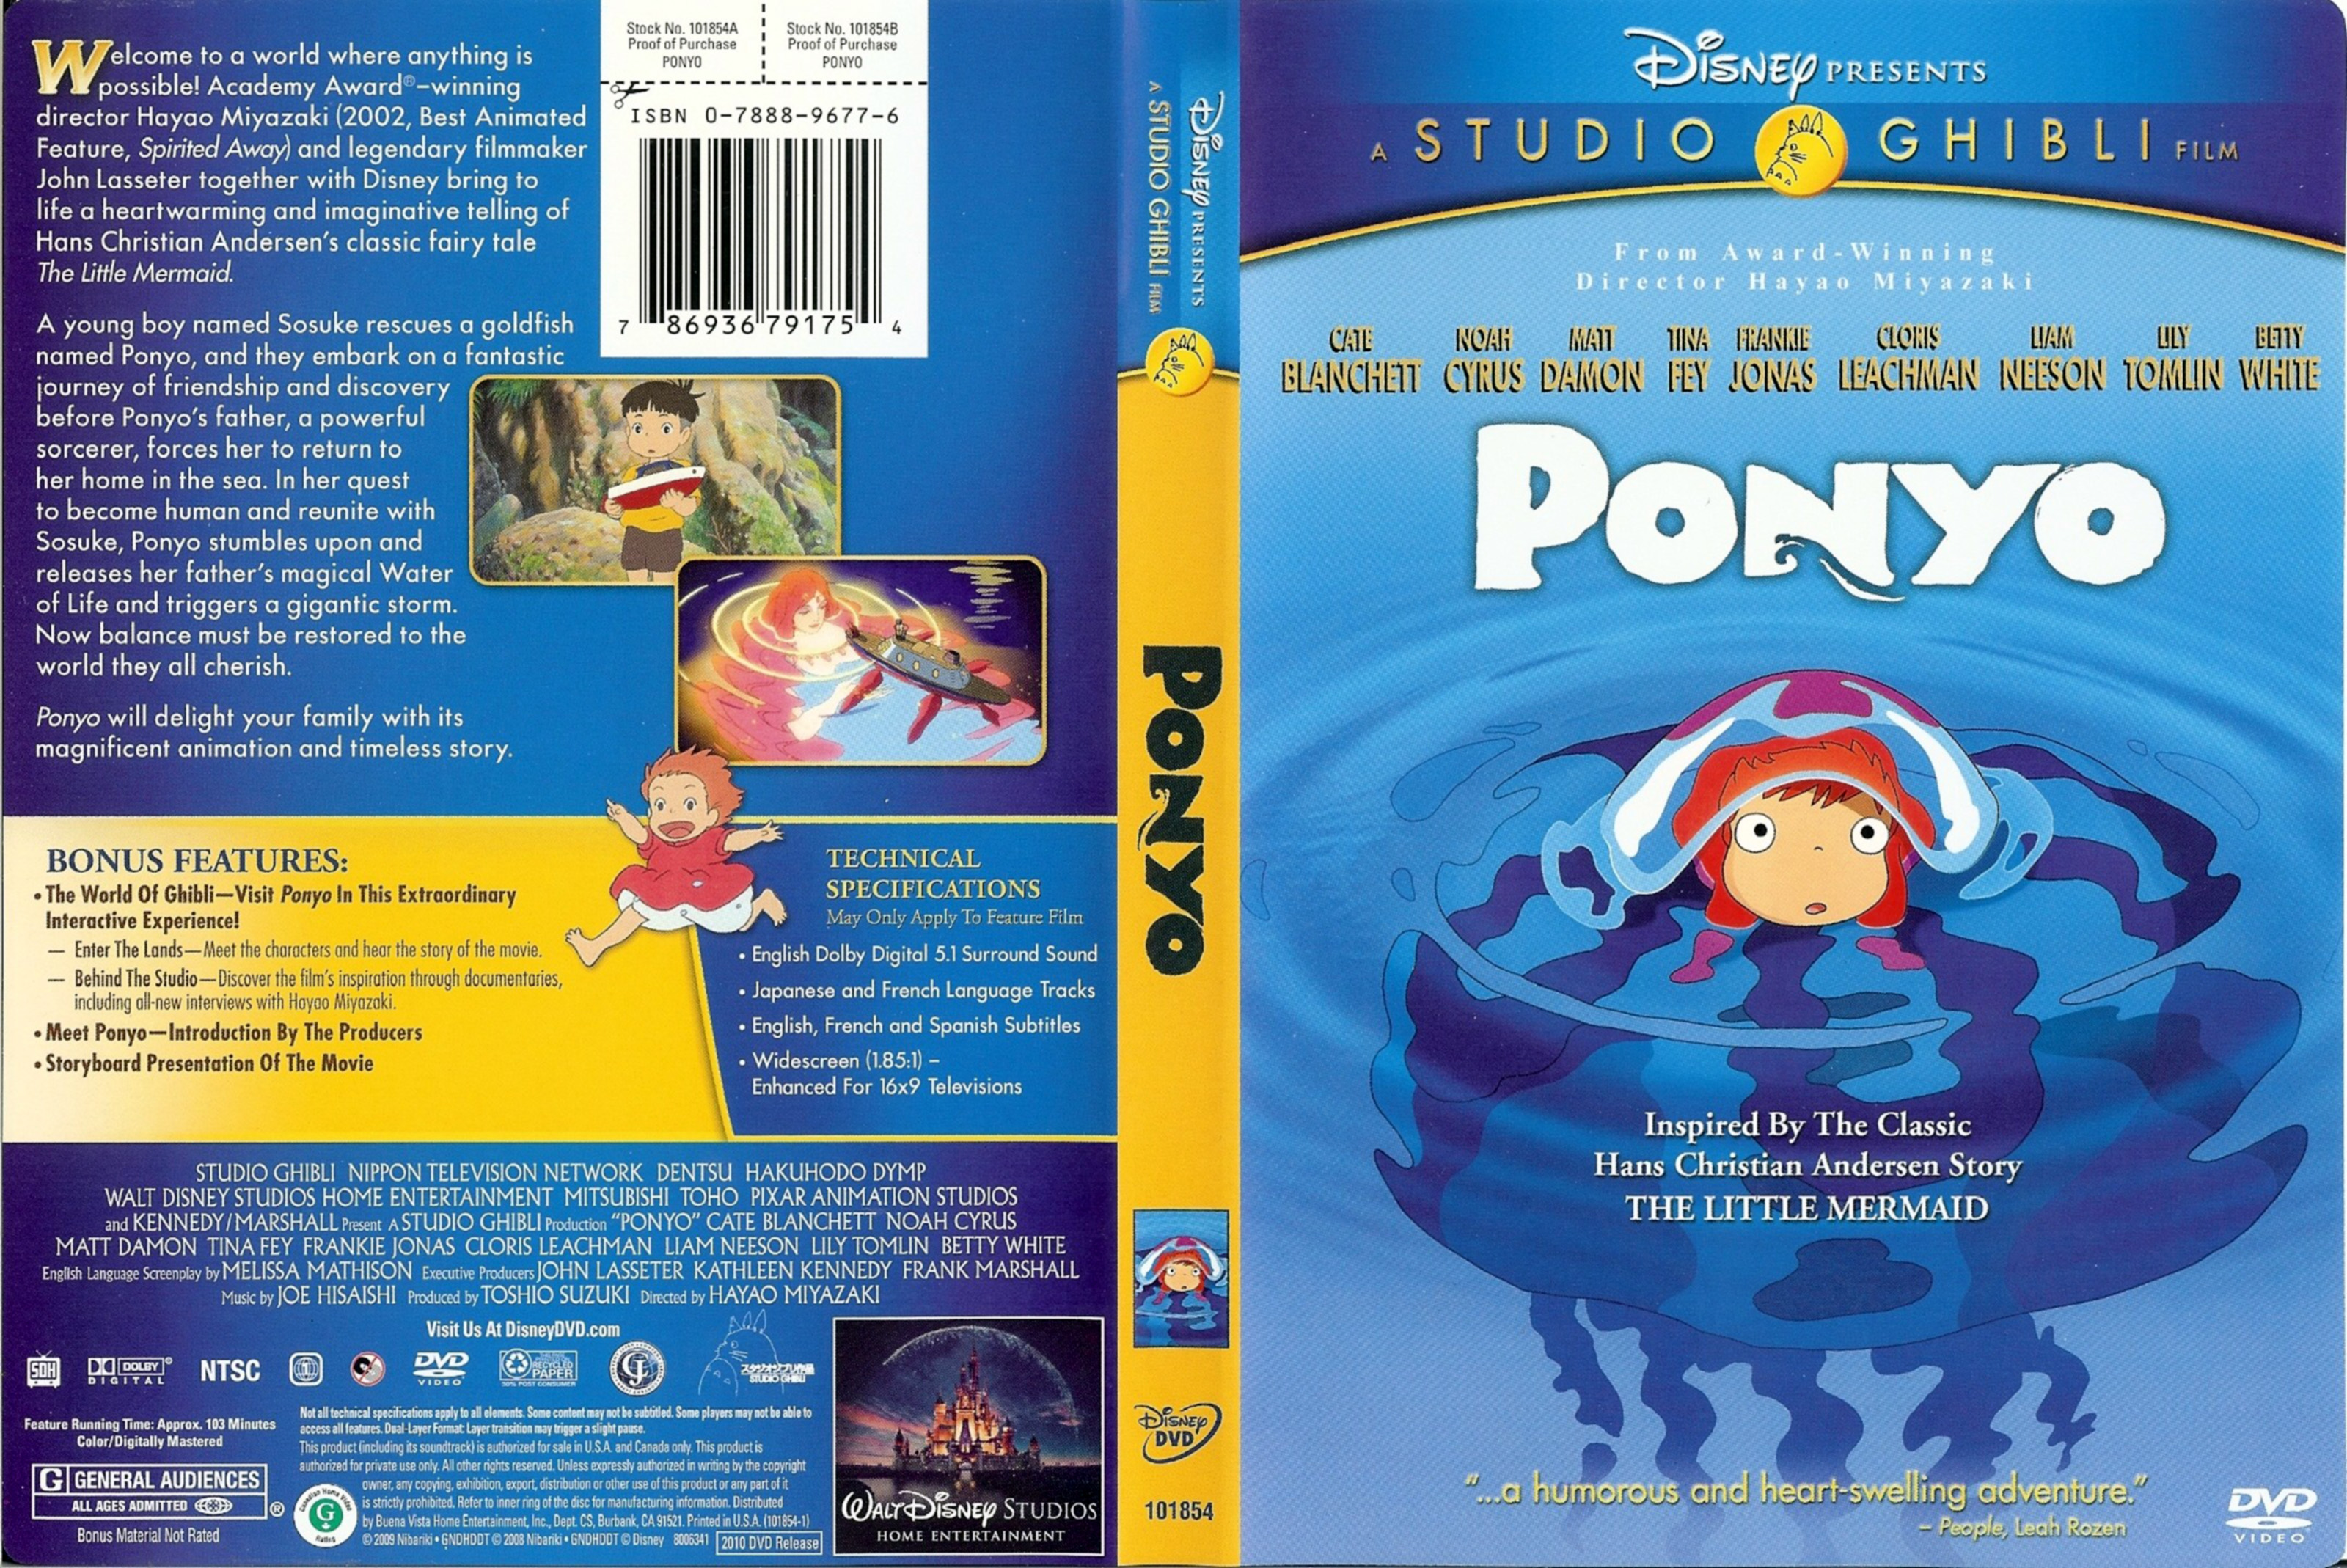 Jaquette DVD Ponyo (Canadienne)